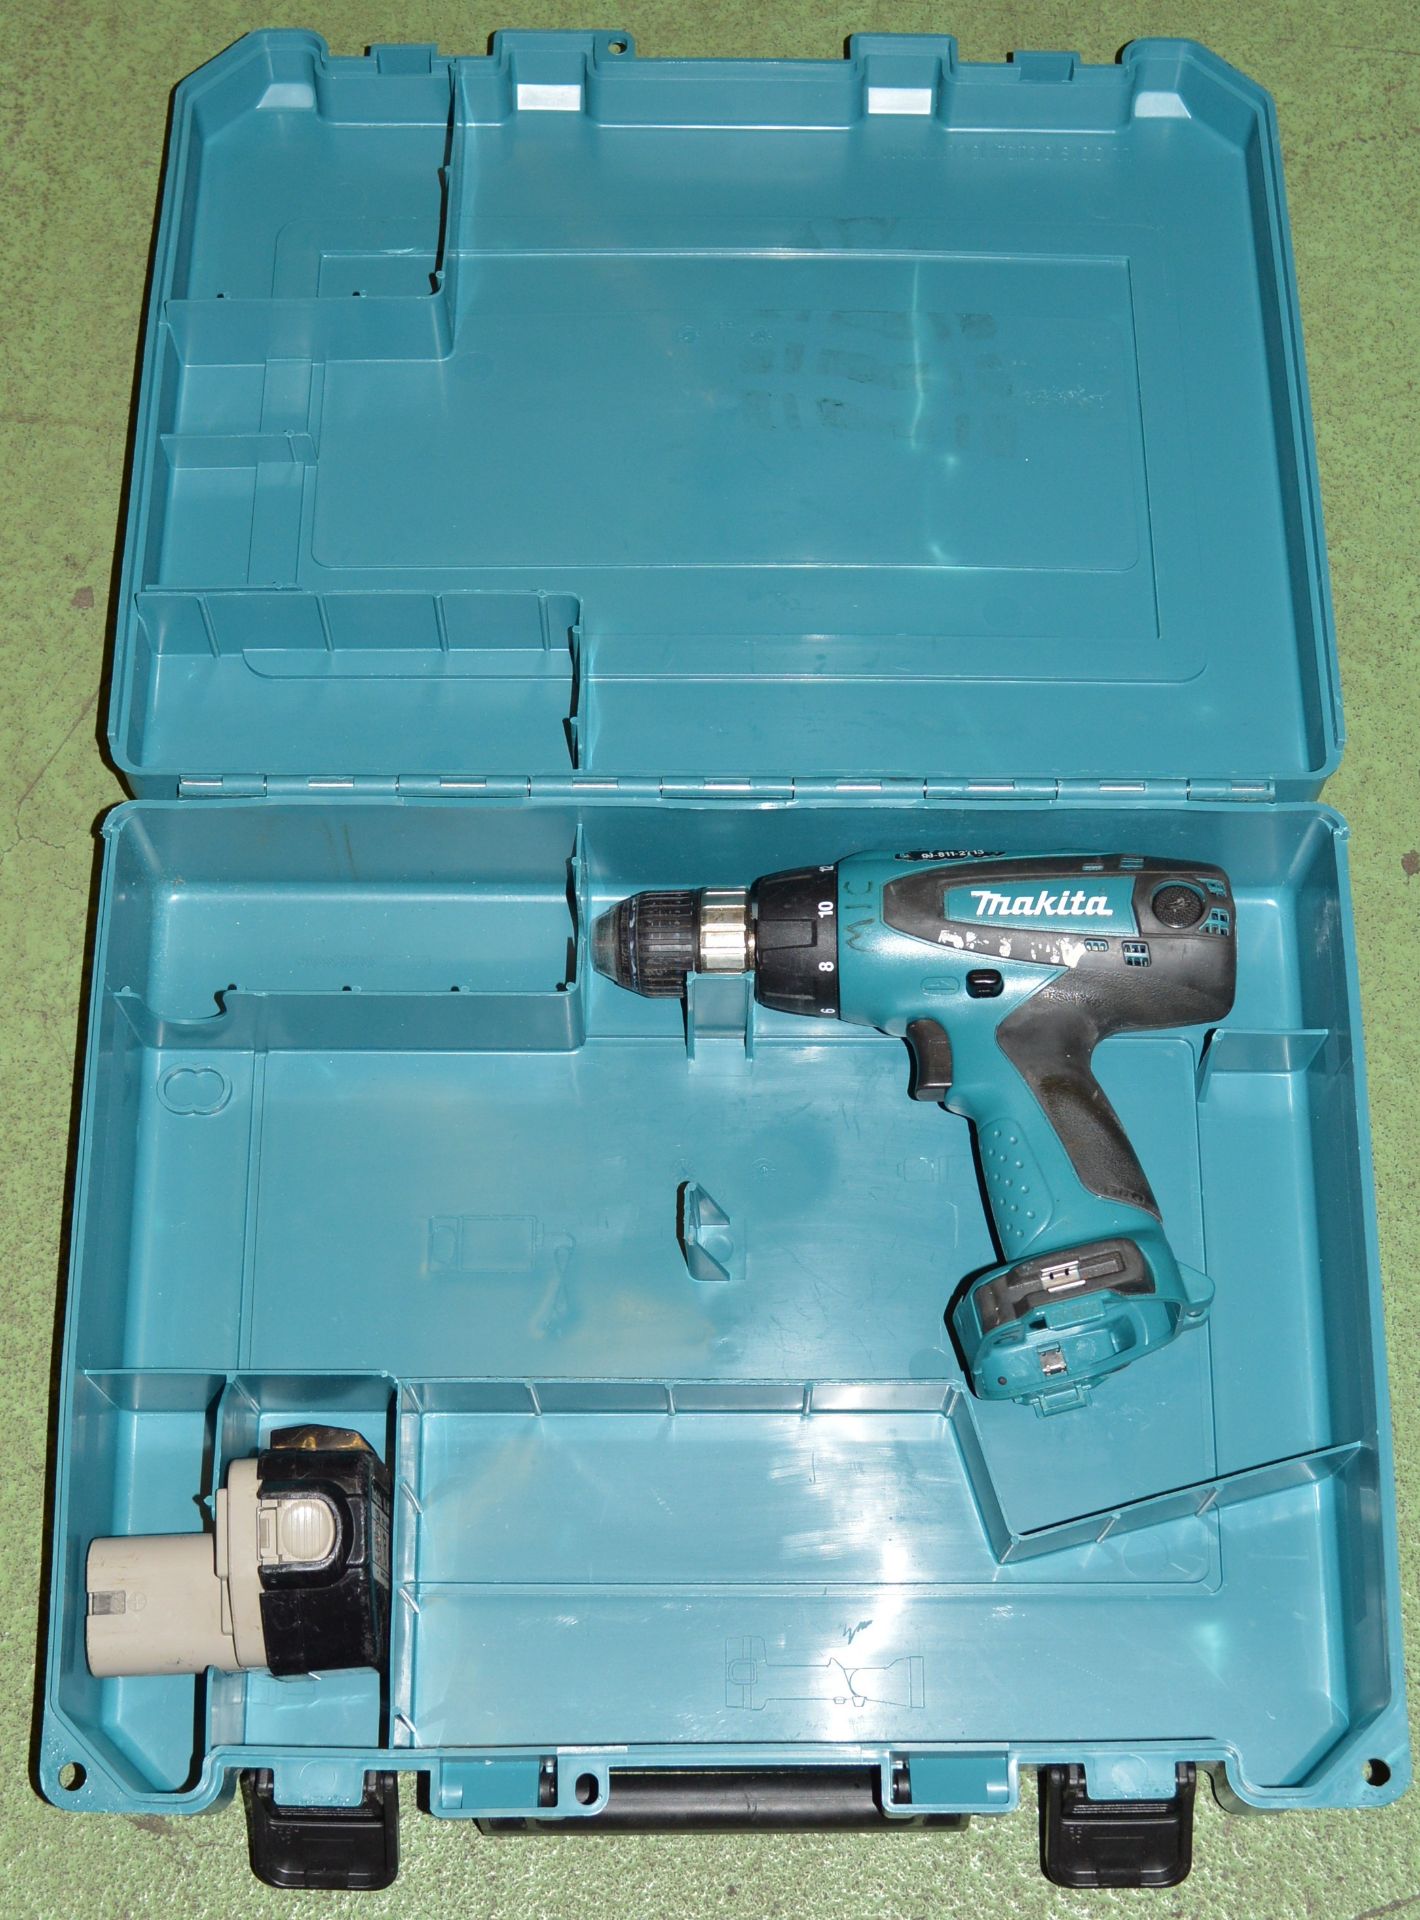 Drill Electric Cordless, Makita 6317DWDE. - Image 2 of 2